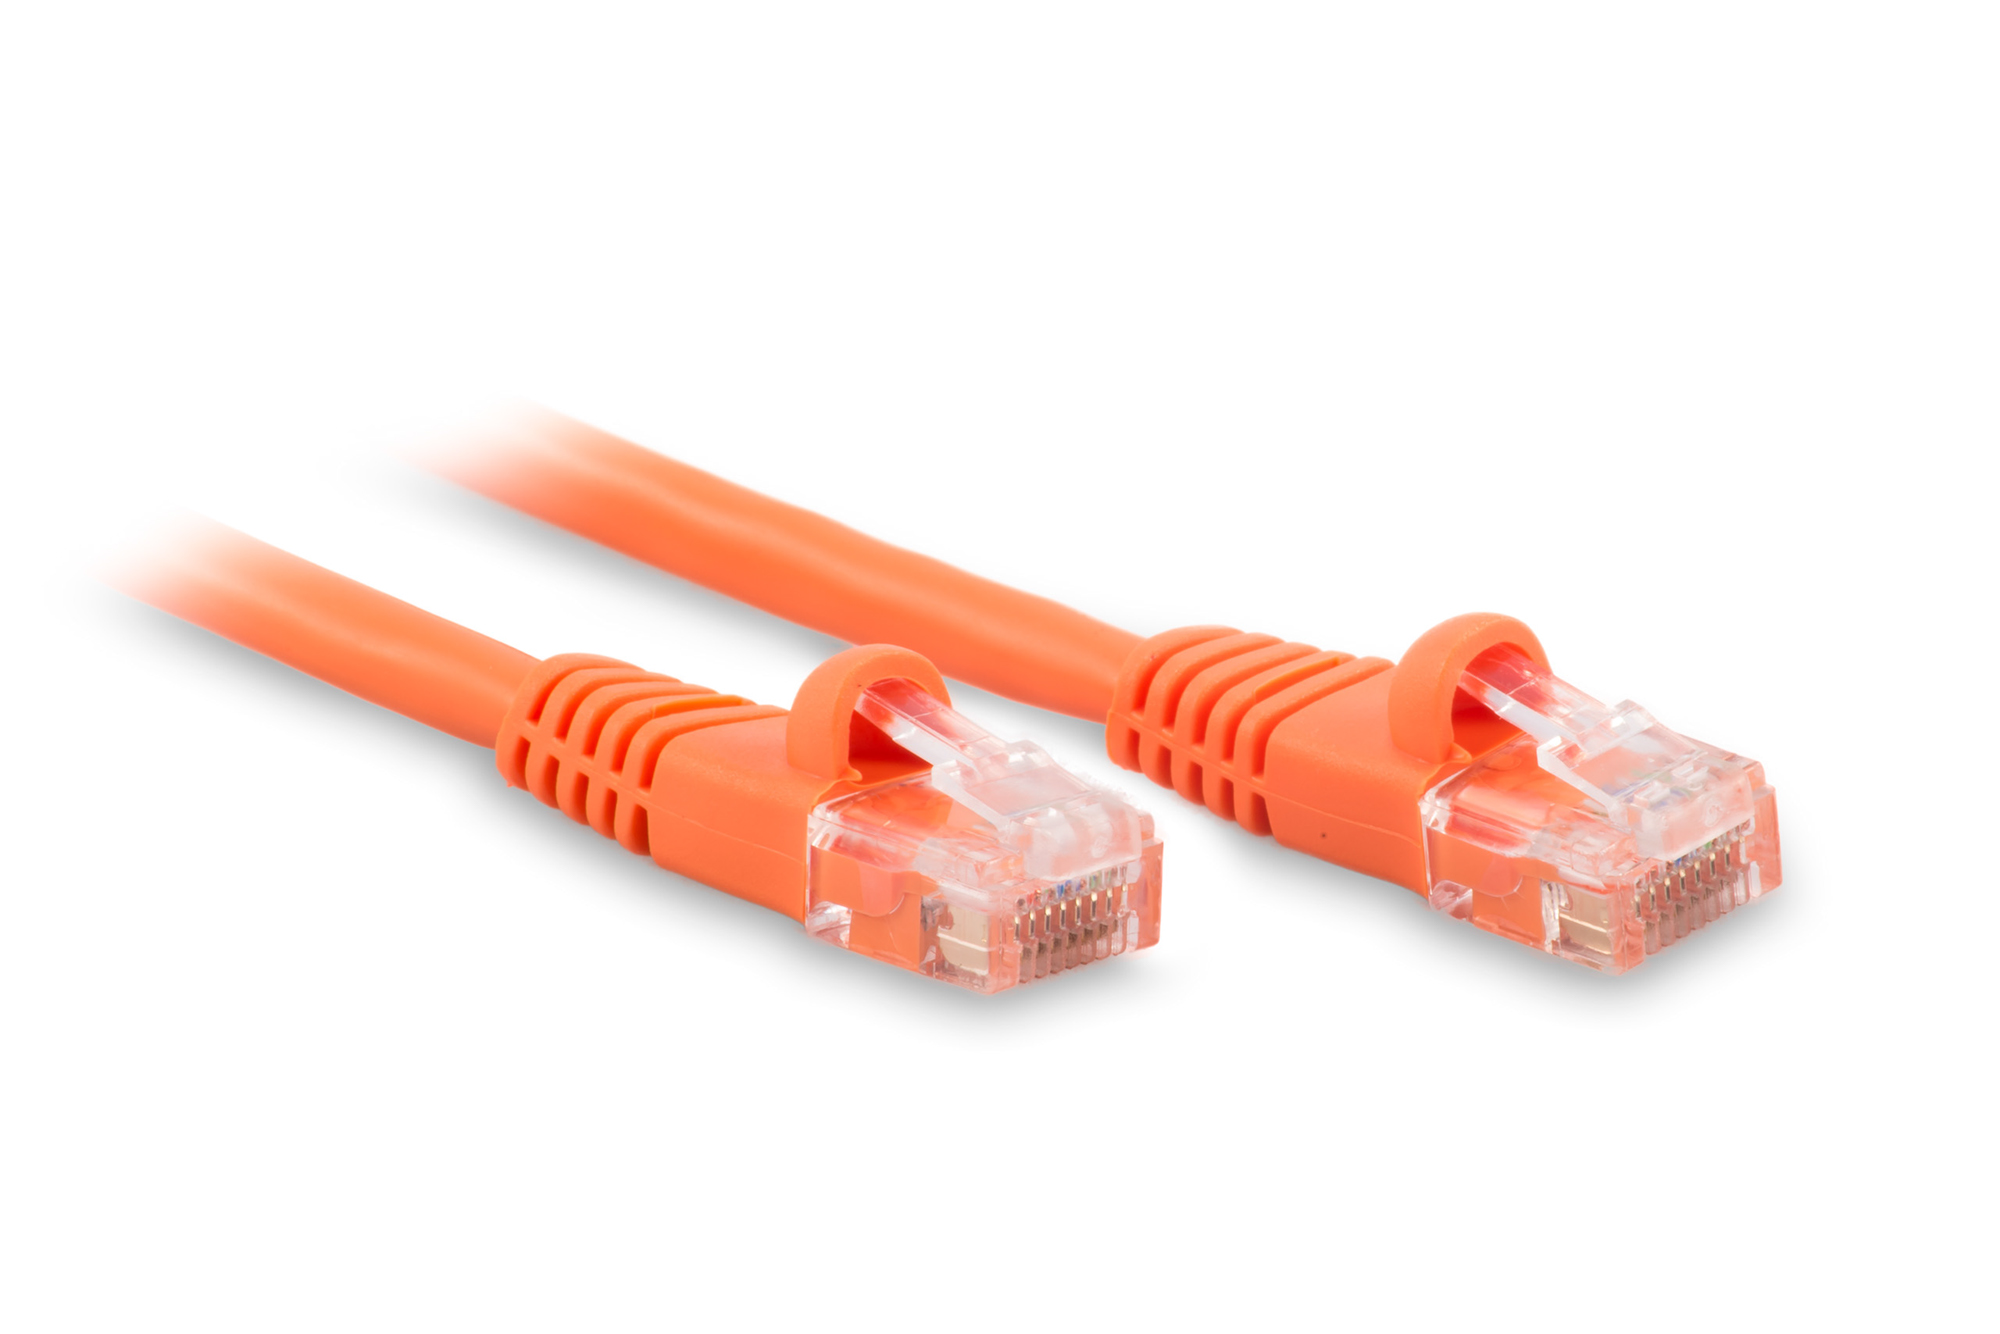 4ft Cat6 Ethernet Patch Cable - Orange Color - Snagless Boot